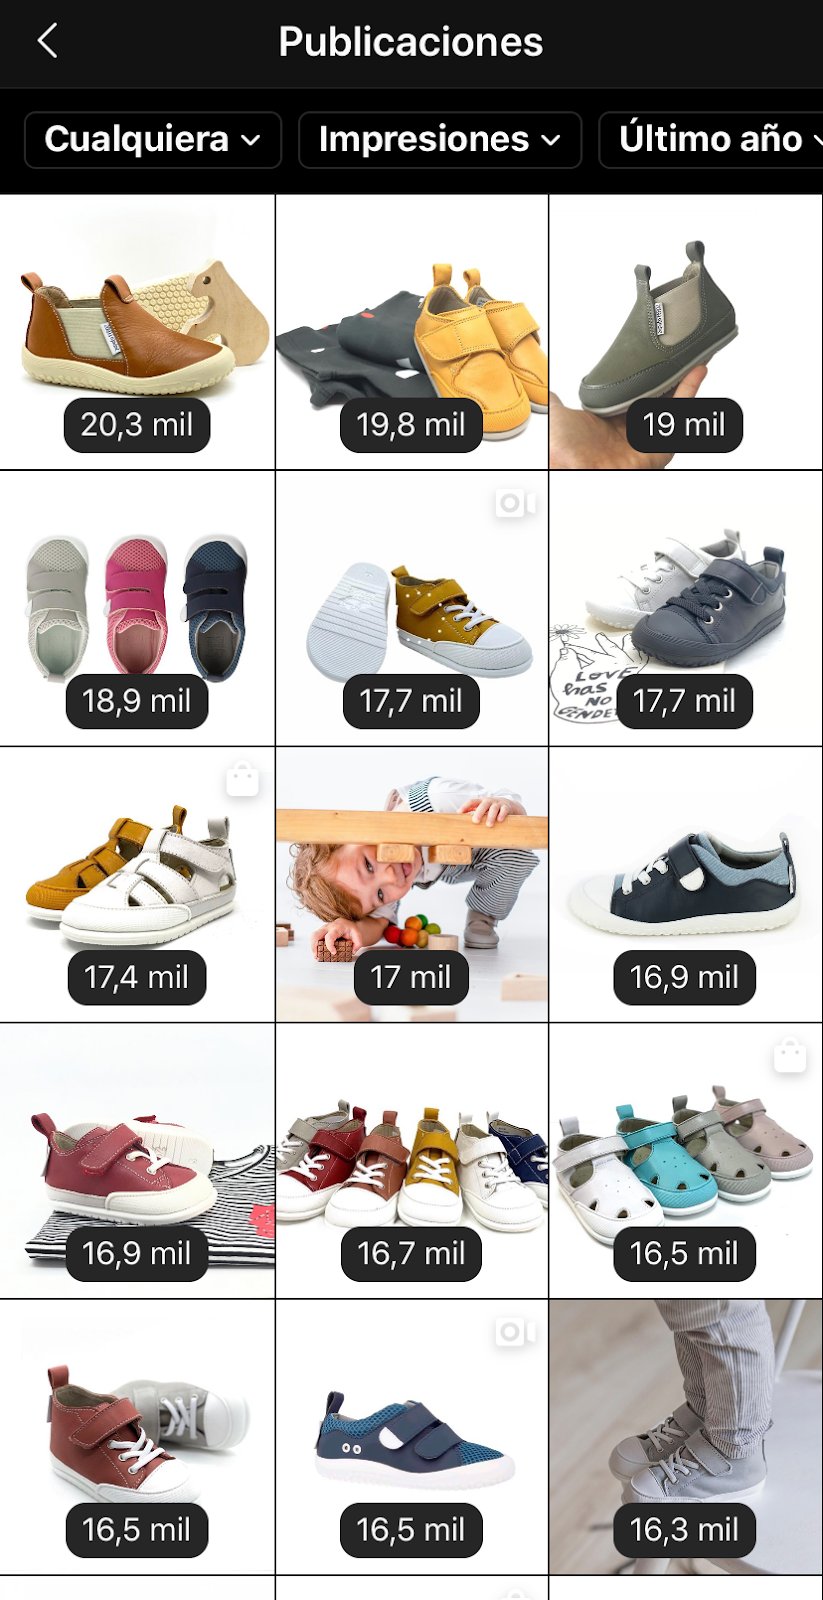 how-we-created-a-65k-month-healthy-children-s-footwear-brand-that-sells-almost-everything-on-launch-day